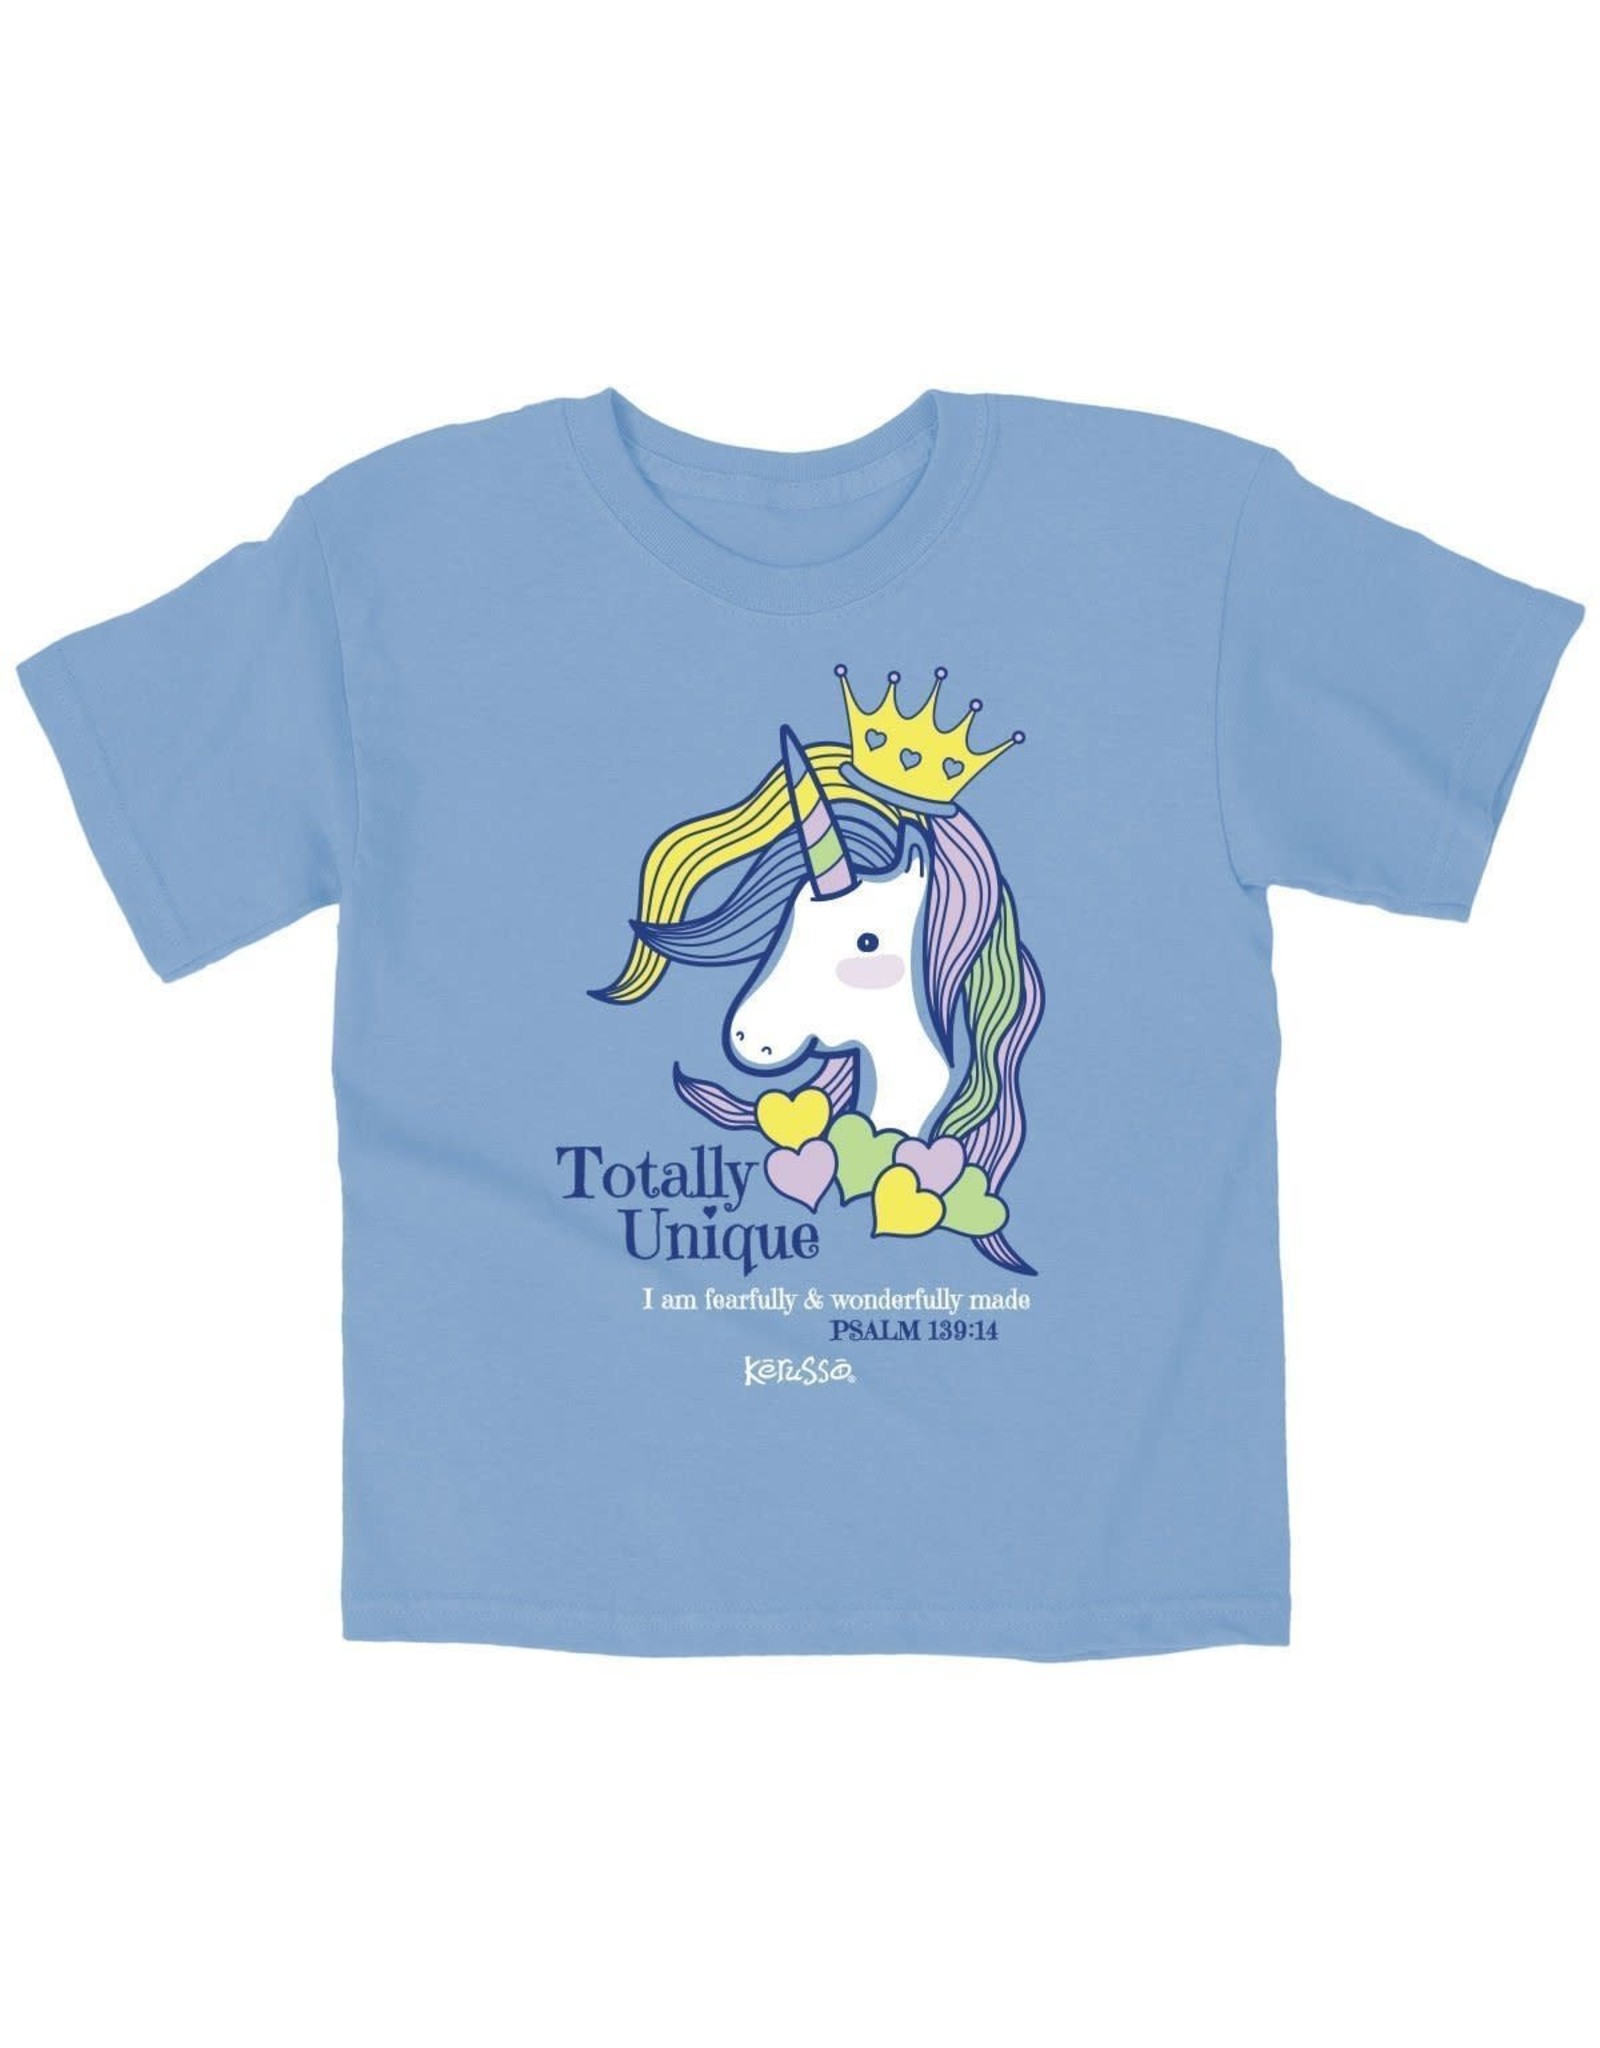 Unicorn, - Church & Unique Reilly\'s - Shirts Gift Kids Supply Totally Boutique